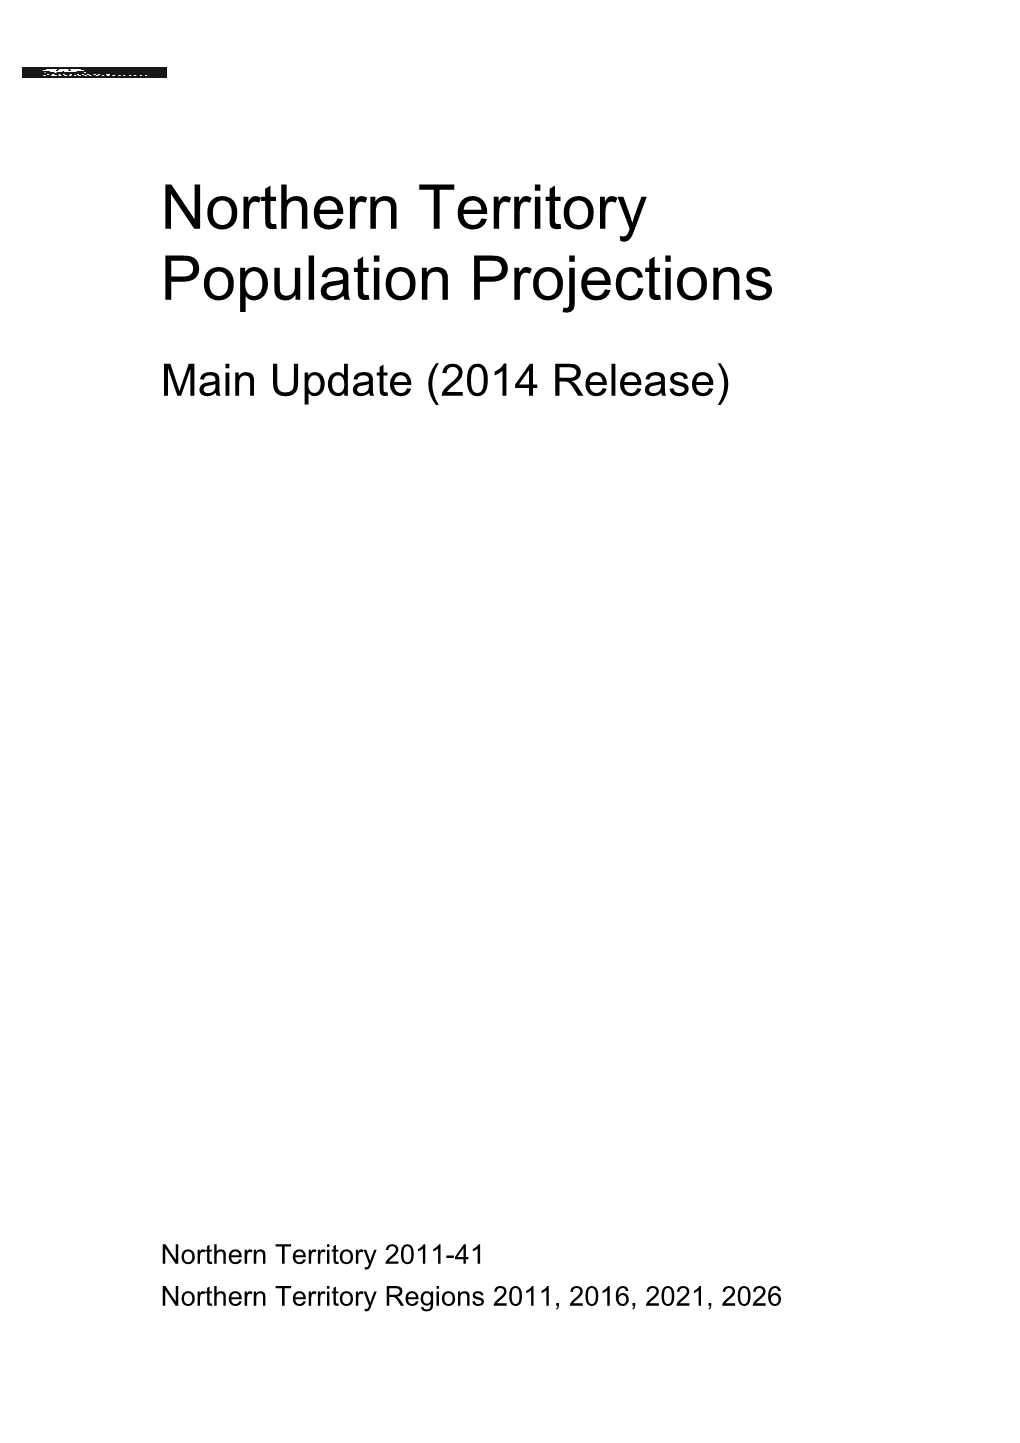 NT Population Projections - Main Update (2014 Release)